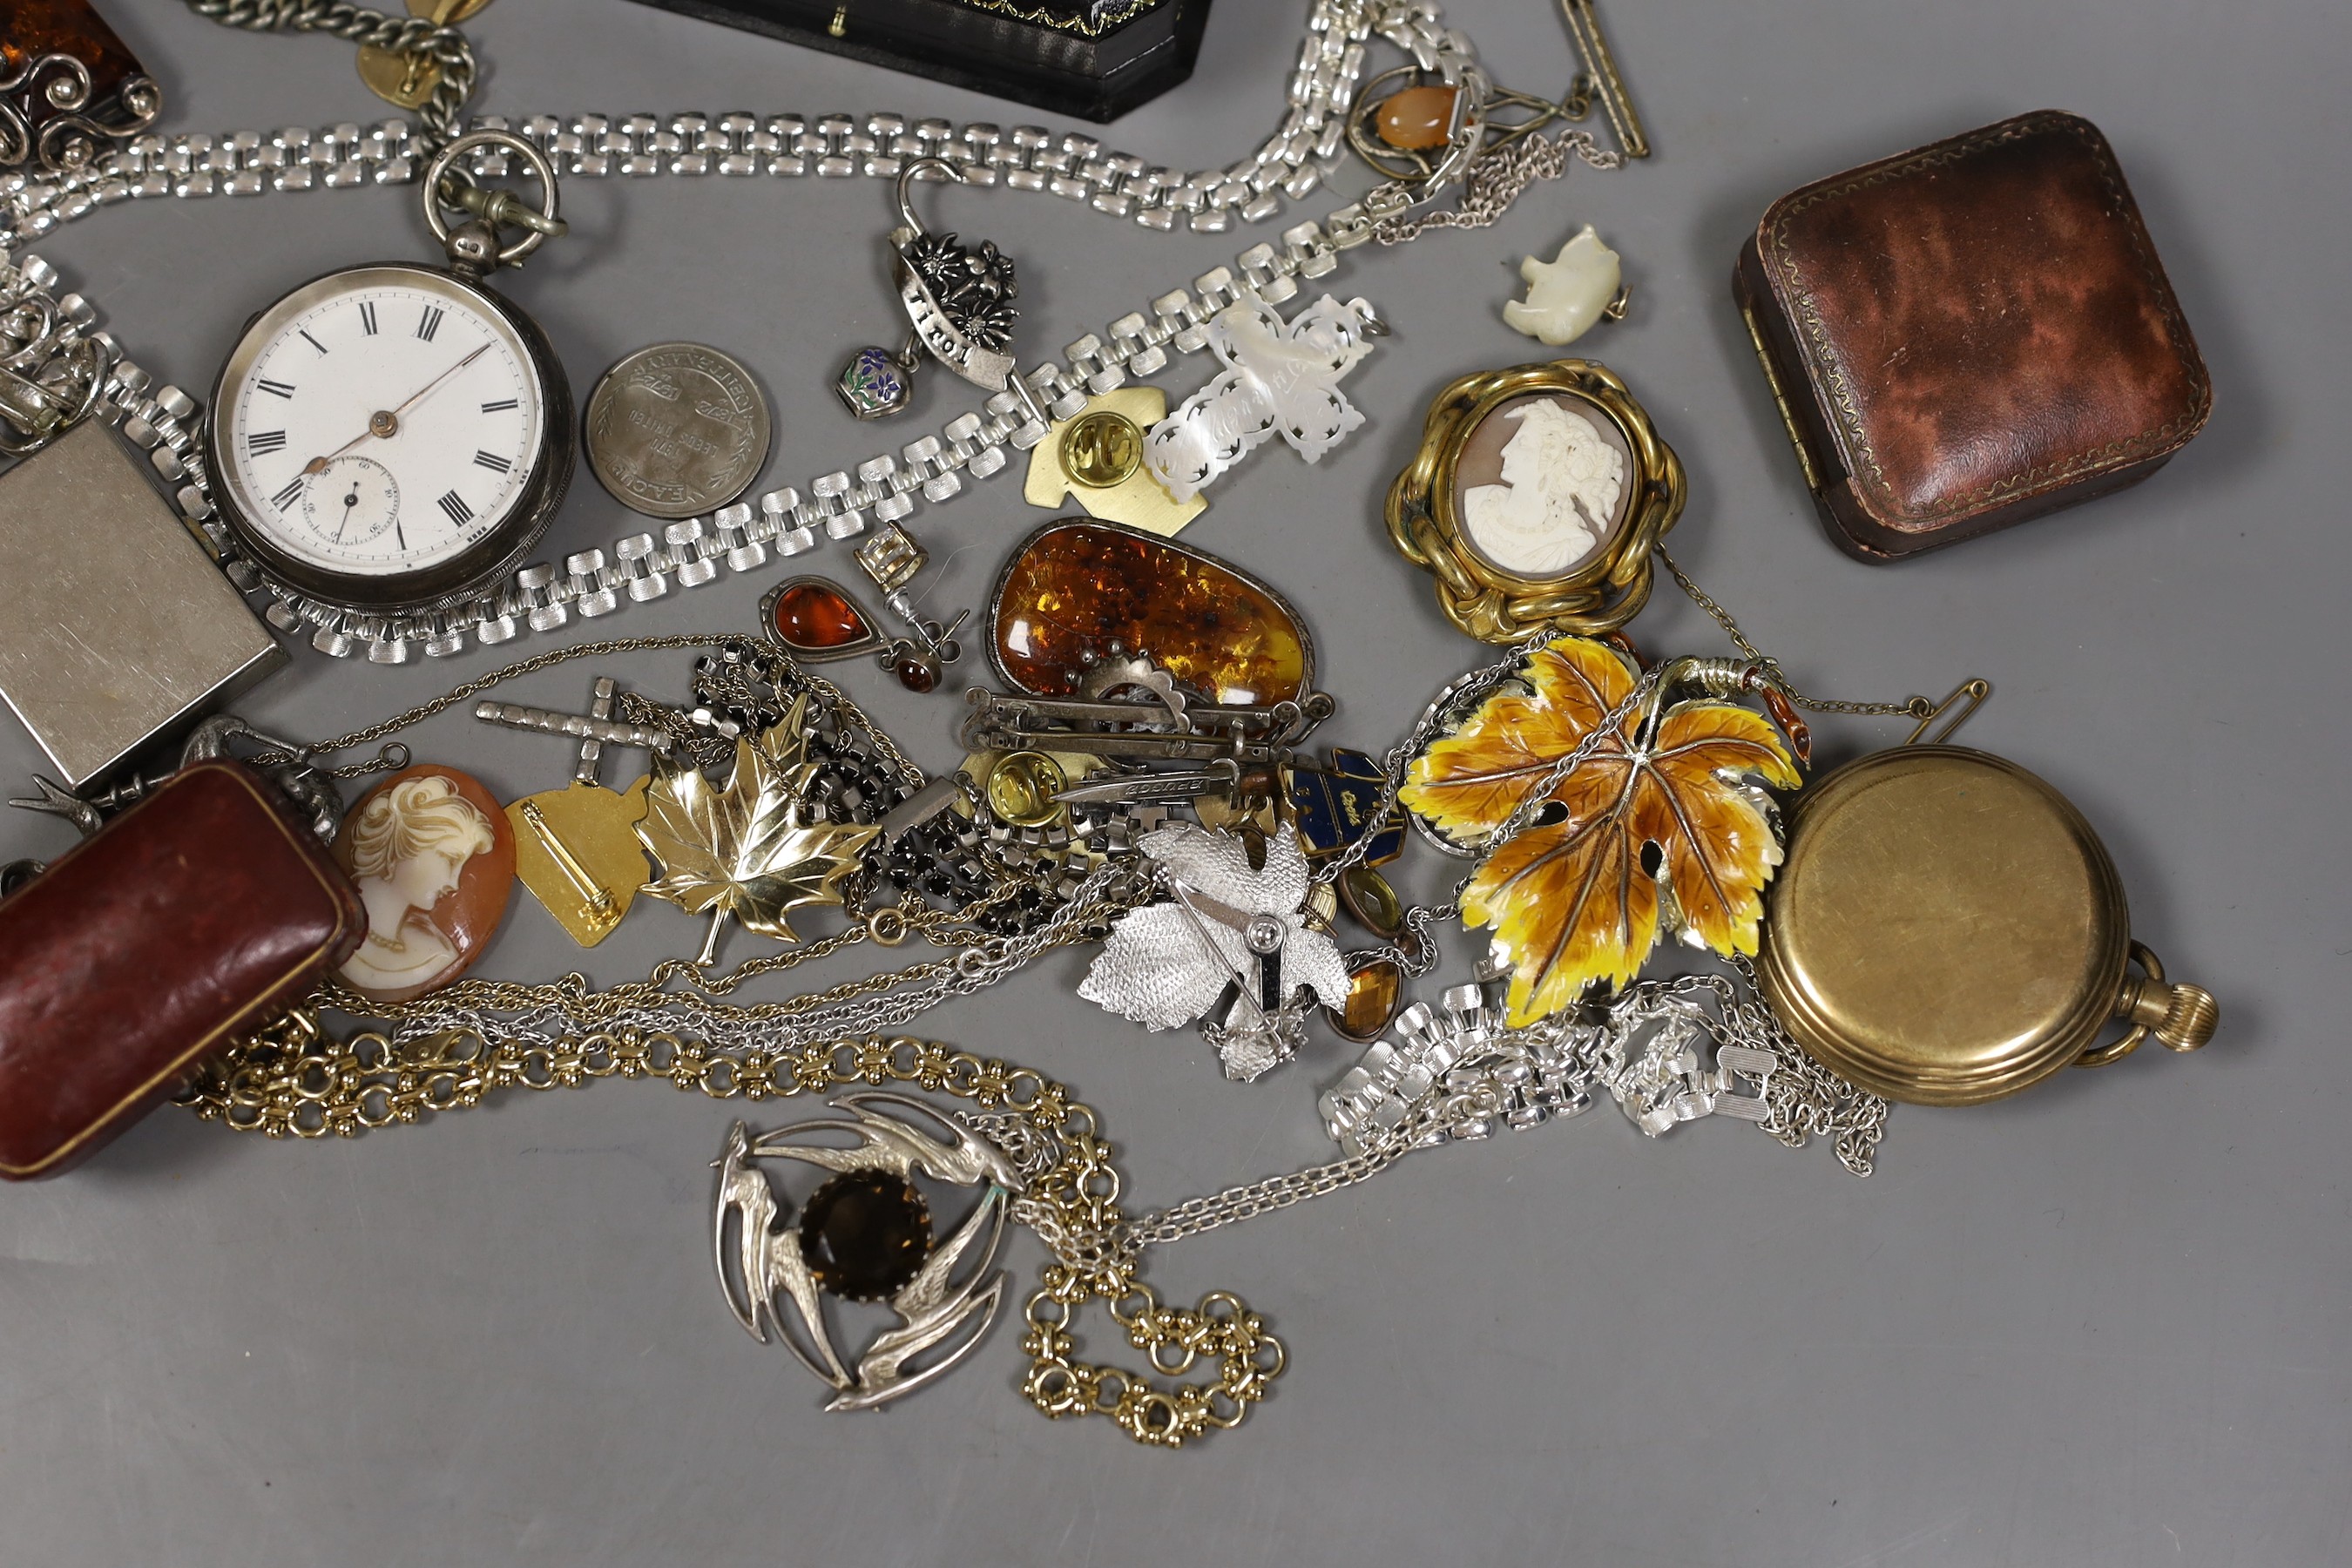 A quantity of assorted costume jewellery and other items including jewellery boxes, a silver open faced pocket watch and a gold plated pocket watch.